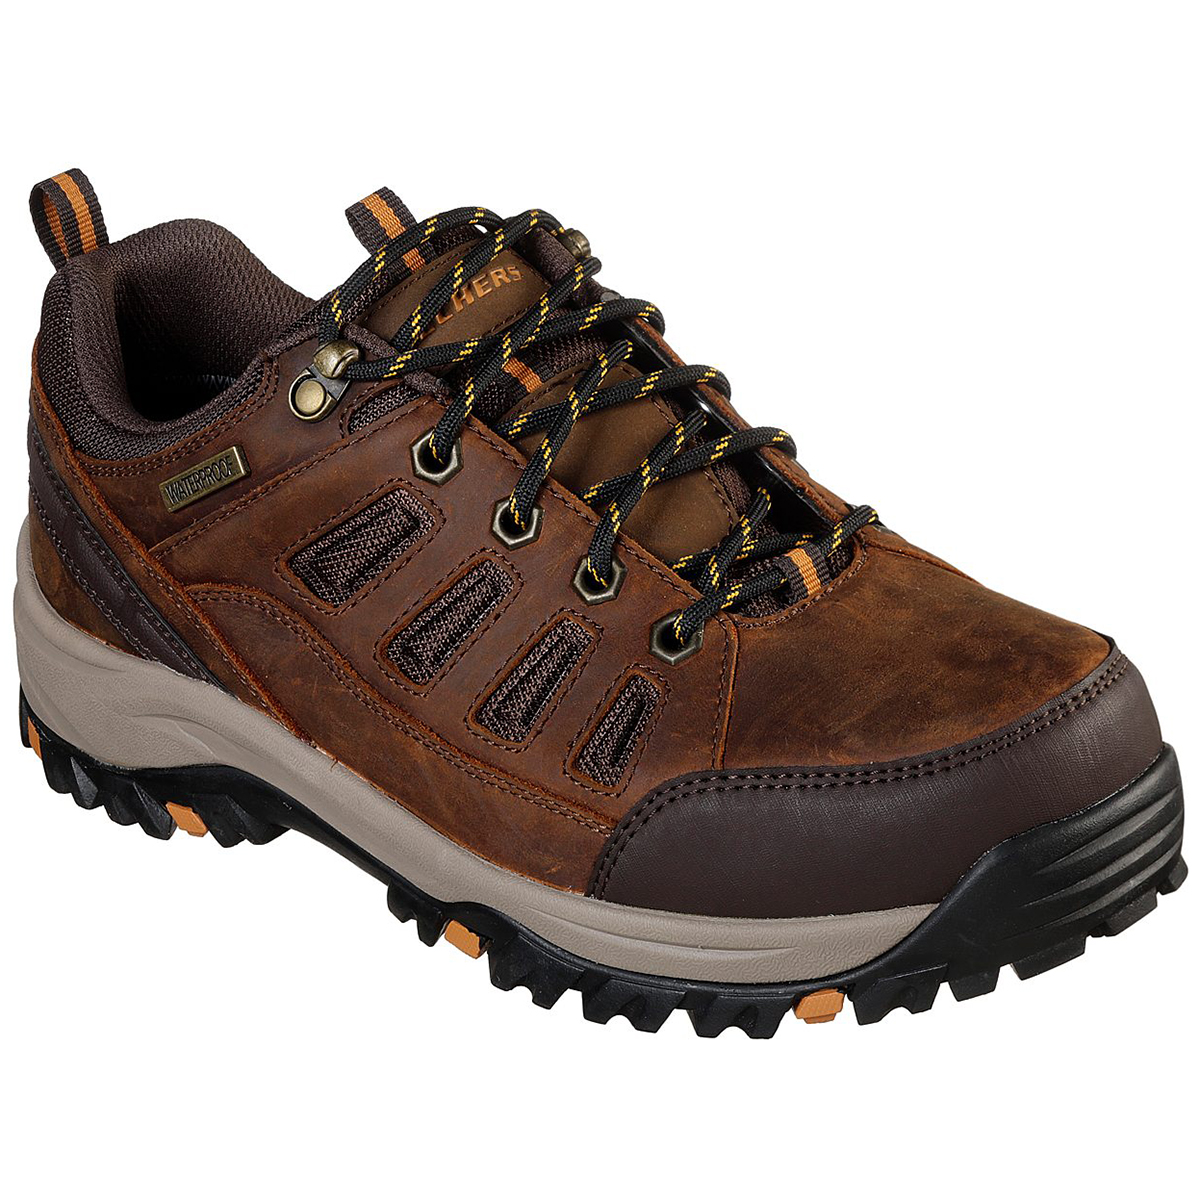 Skechers Men's Relaxed Fit Relment-Semego Hiking Shoe - Brown, 9.5